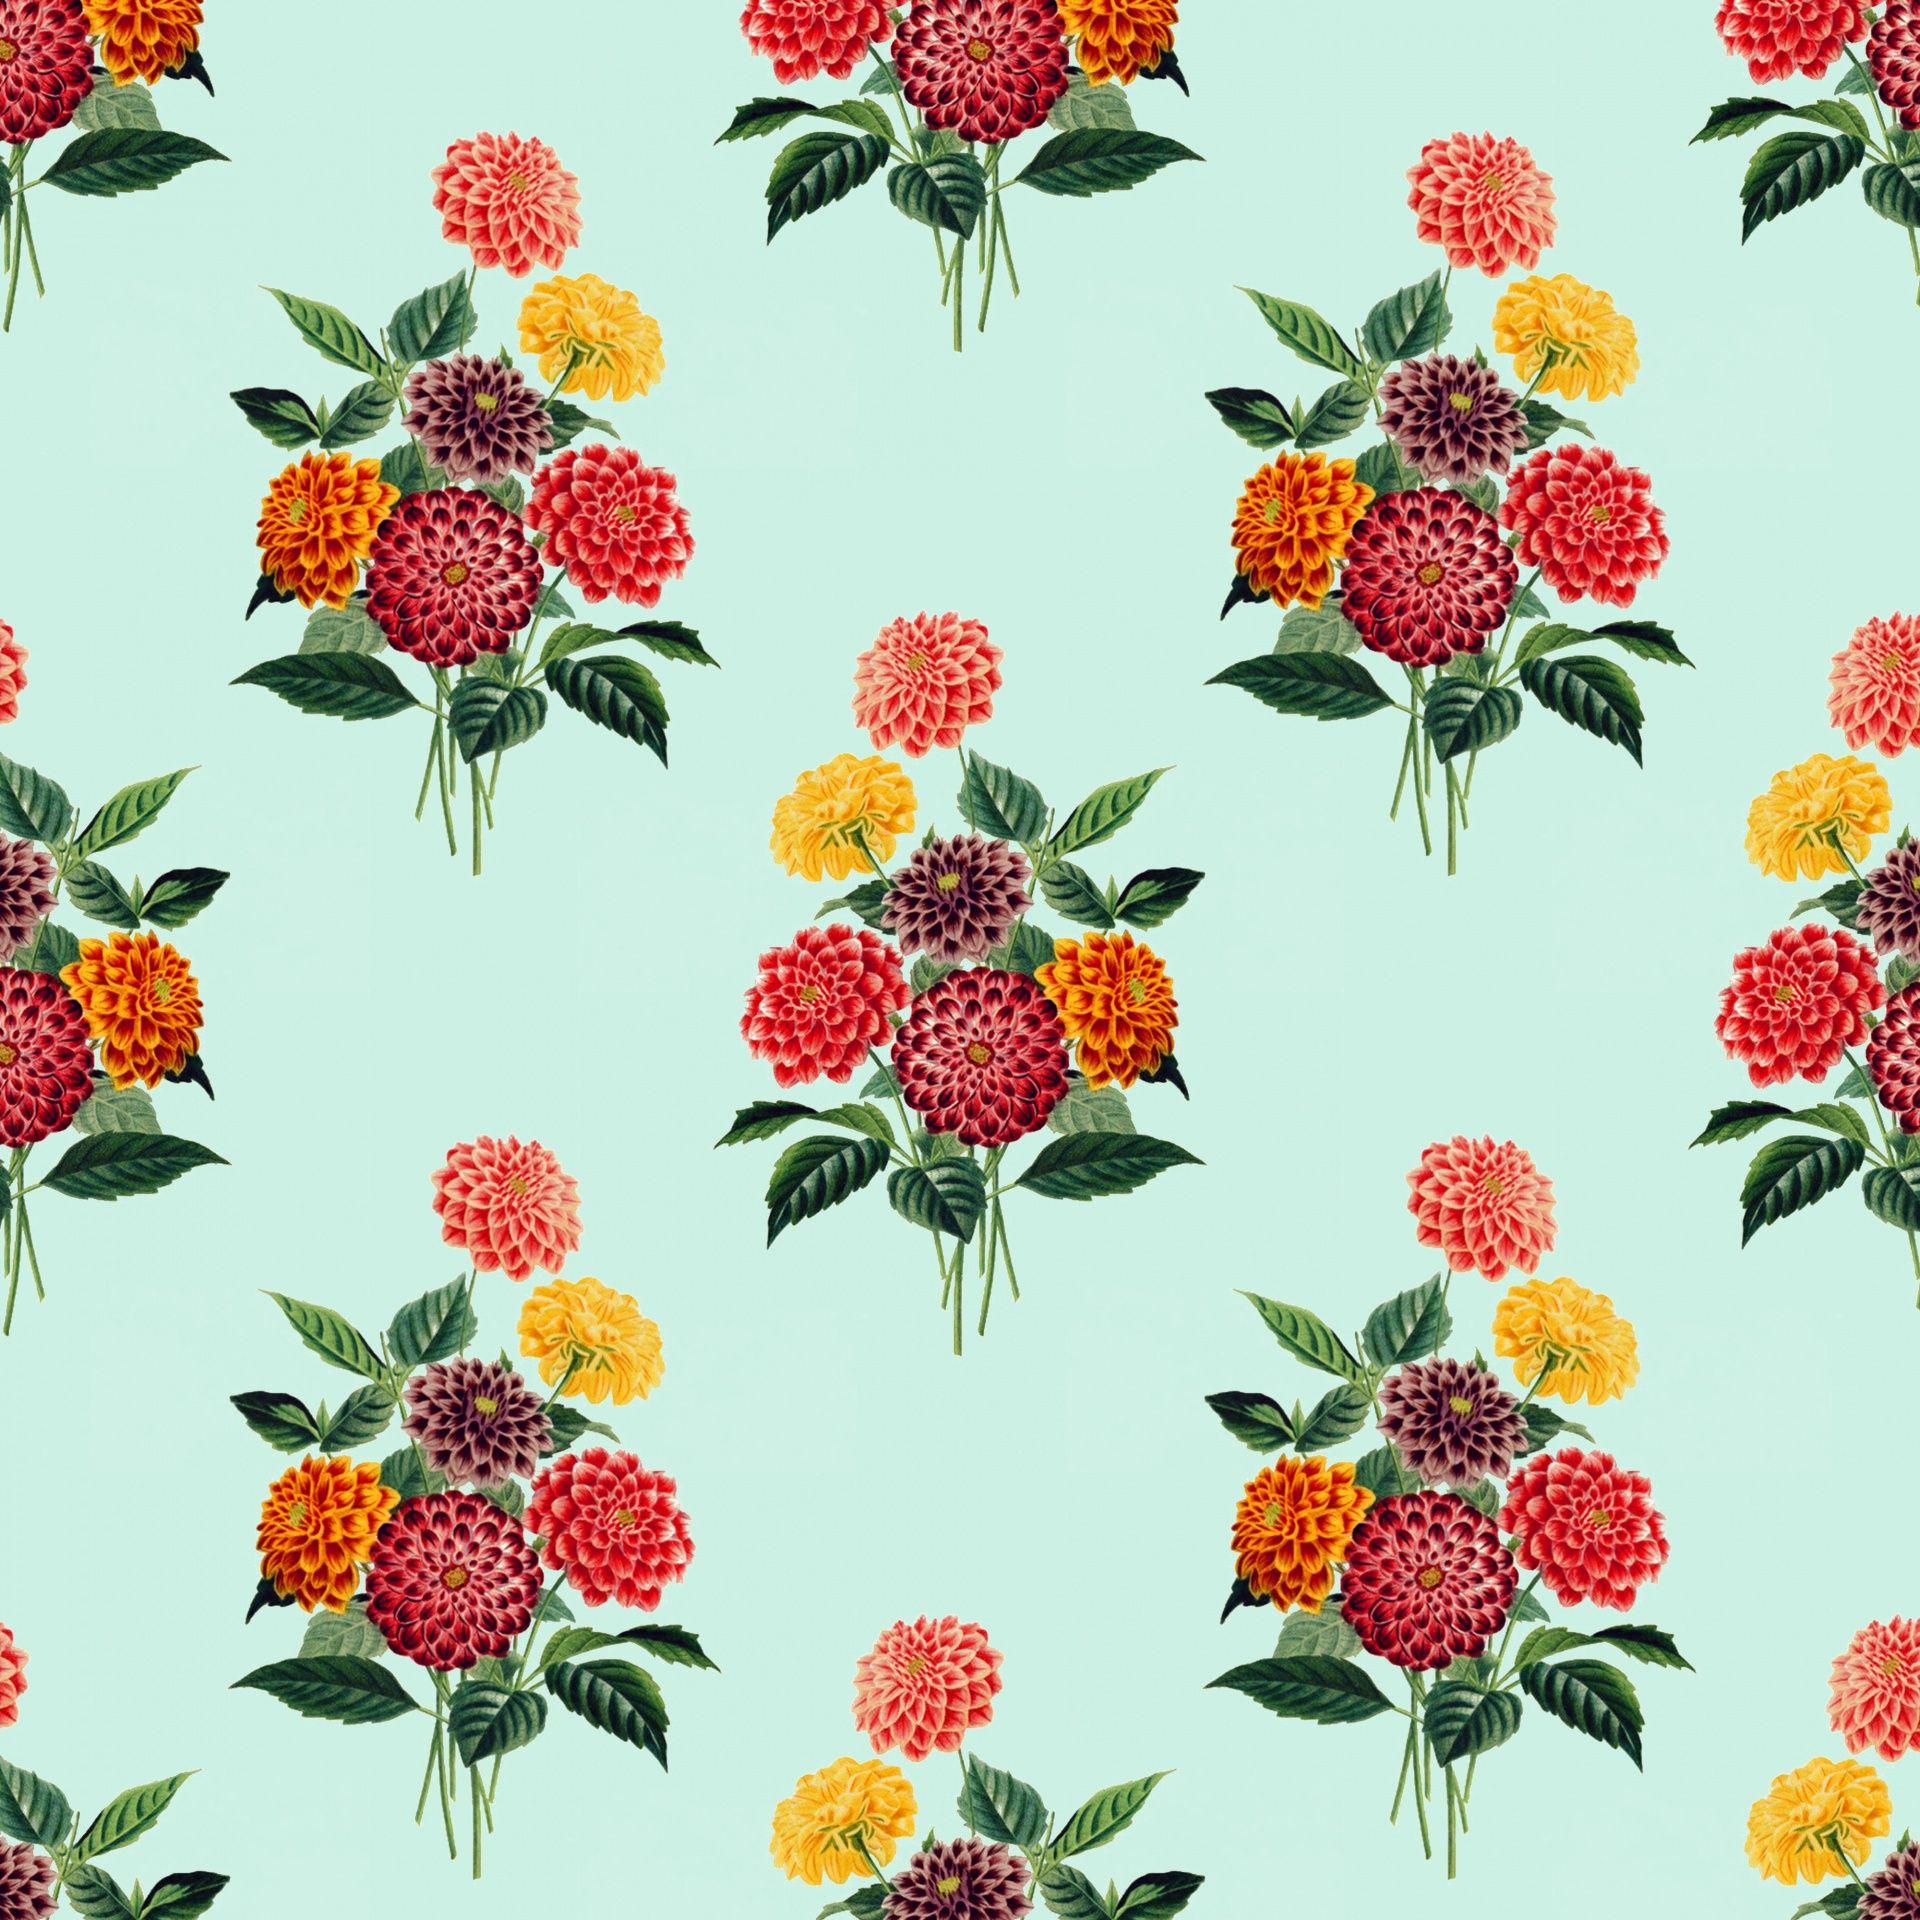 Flowers Vintage Wallpaper Free Domain Picture